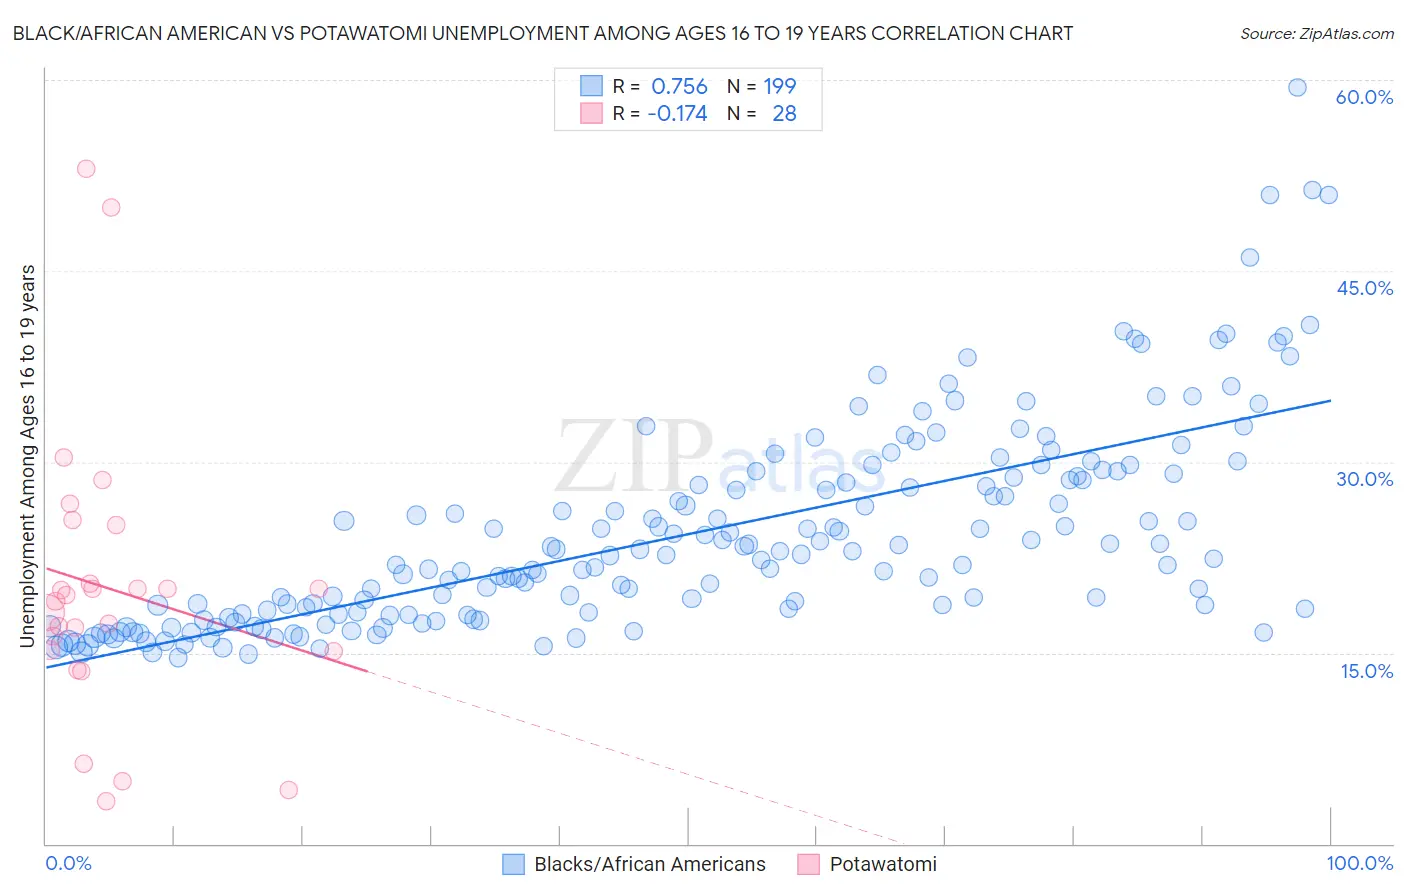 Black/African American vs Potawatomi Unemployment Among Ages 16 to 19 years